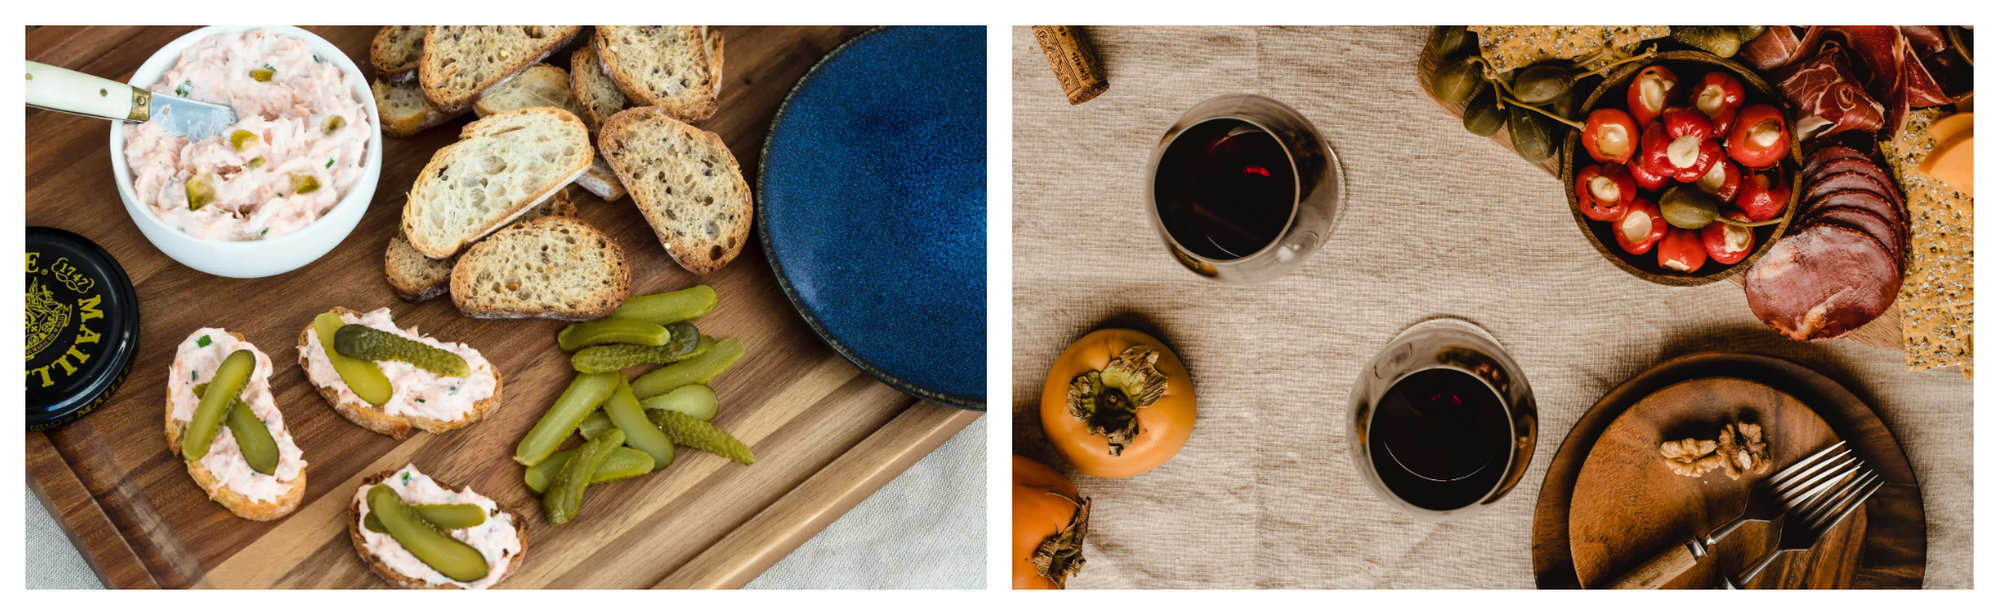 Left: A charcuterie board of rillettes and cornichons, ready to be enjoyed on sliced French bread. Right: A table with two glasses of red wine and a full charcuterie board from a bird's eye view with a tan tablecloth.